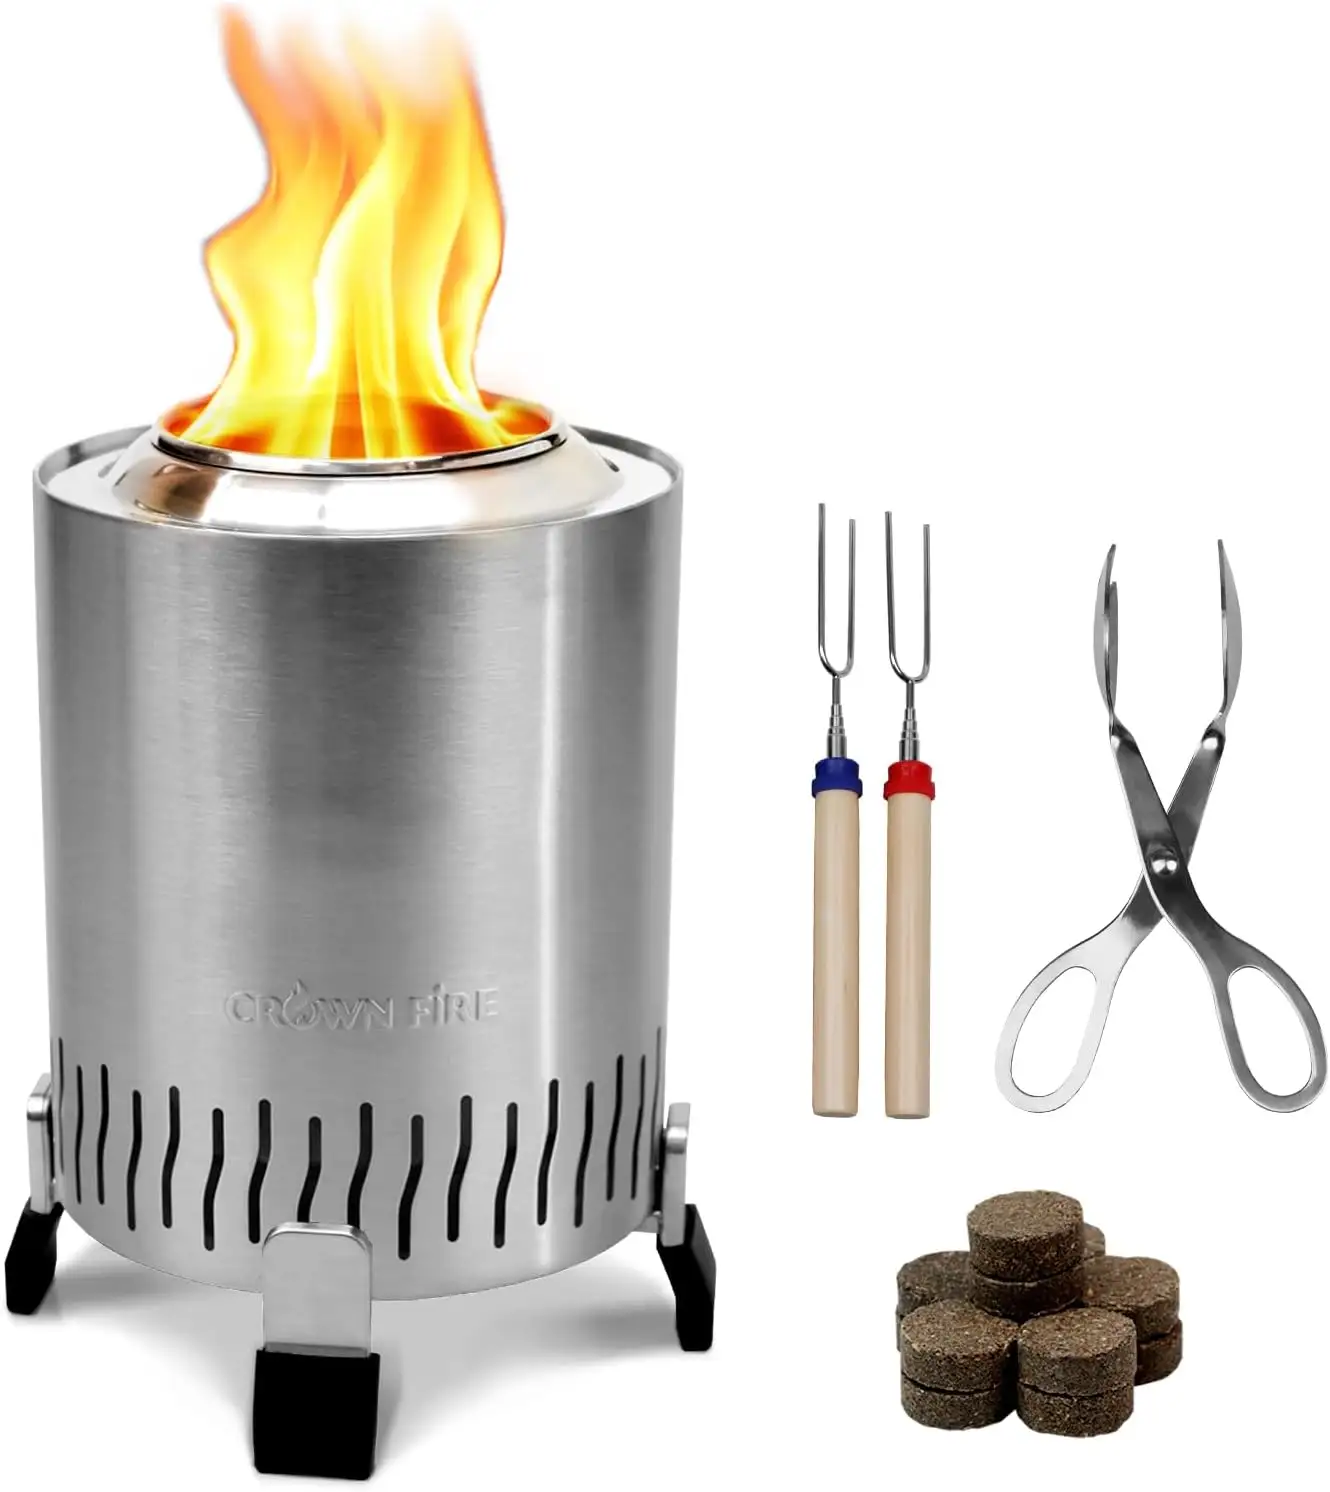 Hot sale Wood Burning stove mini stove Bonfire Fire Pit camp fire stainless steel wood fireplace portable smokeless fire pit